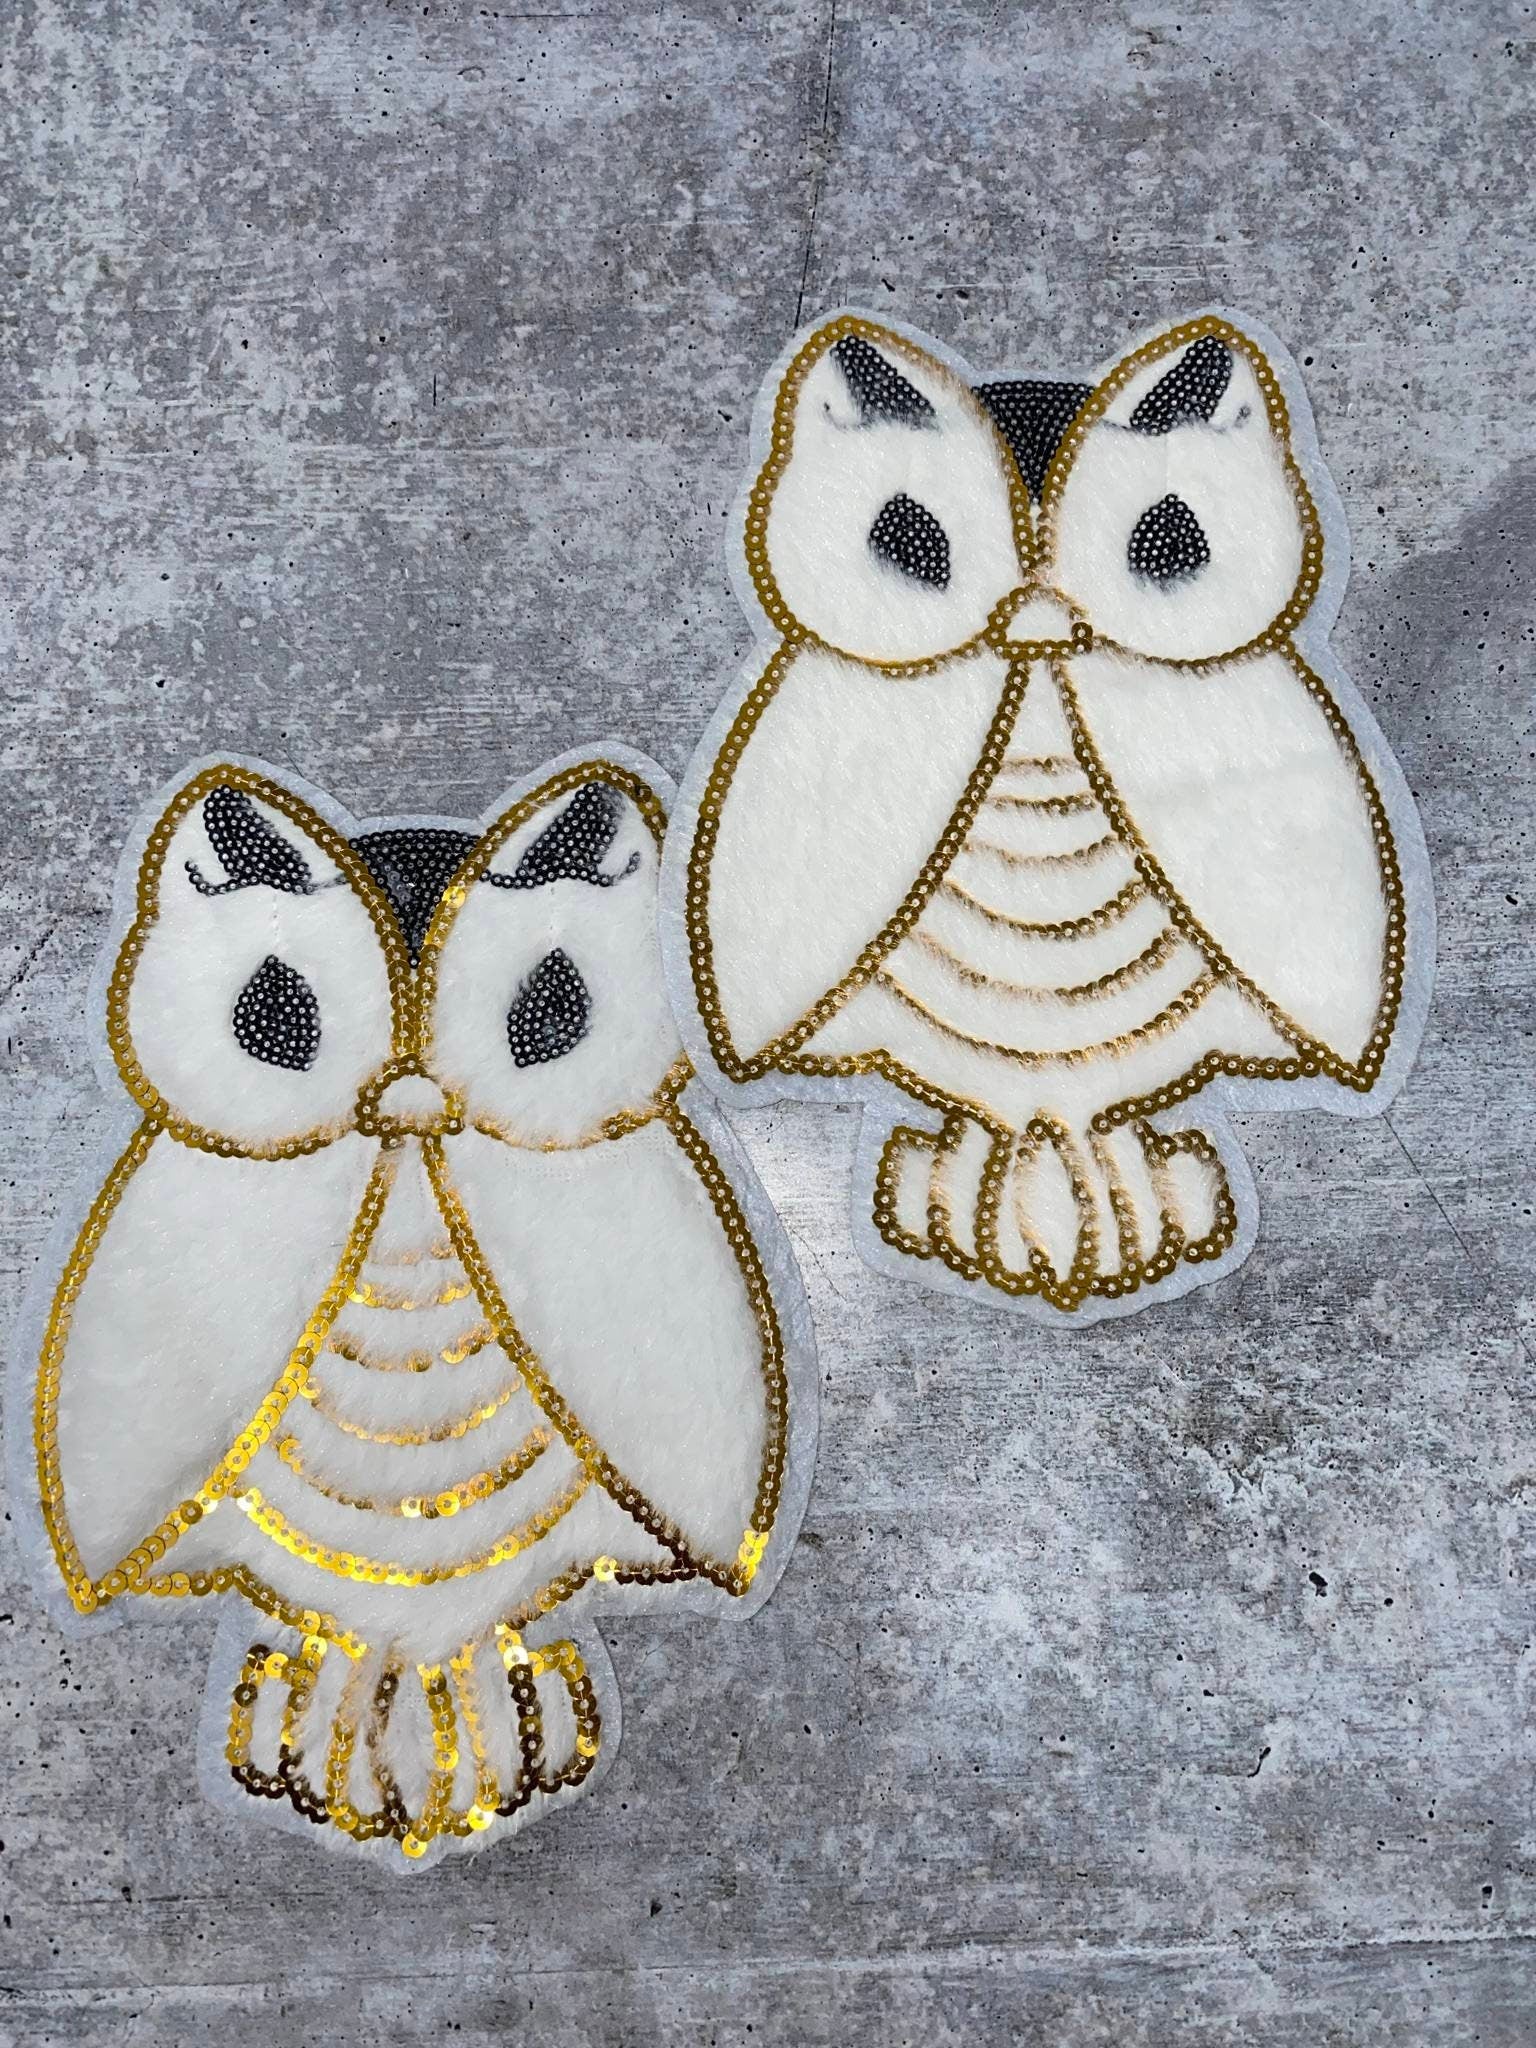 NEW, White & Gold, "OWL" Patch, Size 8", (sew-on), 1-pc Faux Fur and Sequins Fashion Applique, Patch for Clothing, Girls Jacket or Sweater